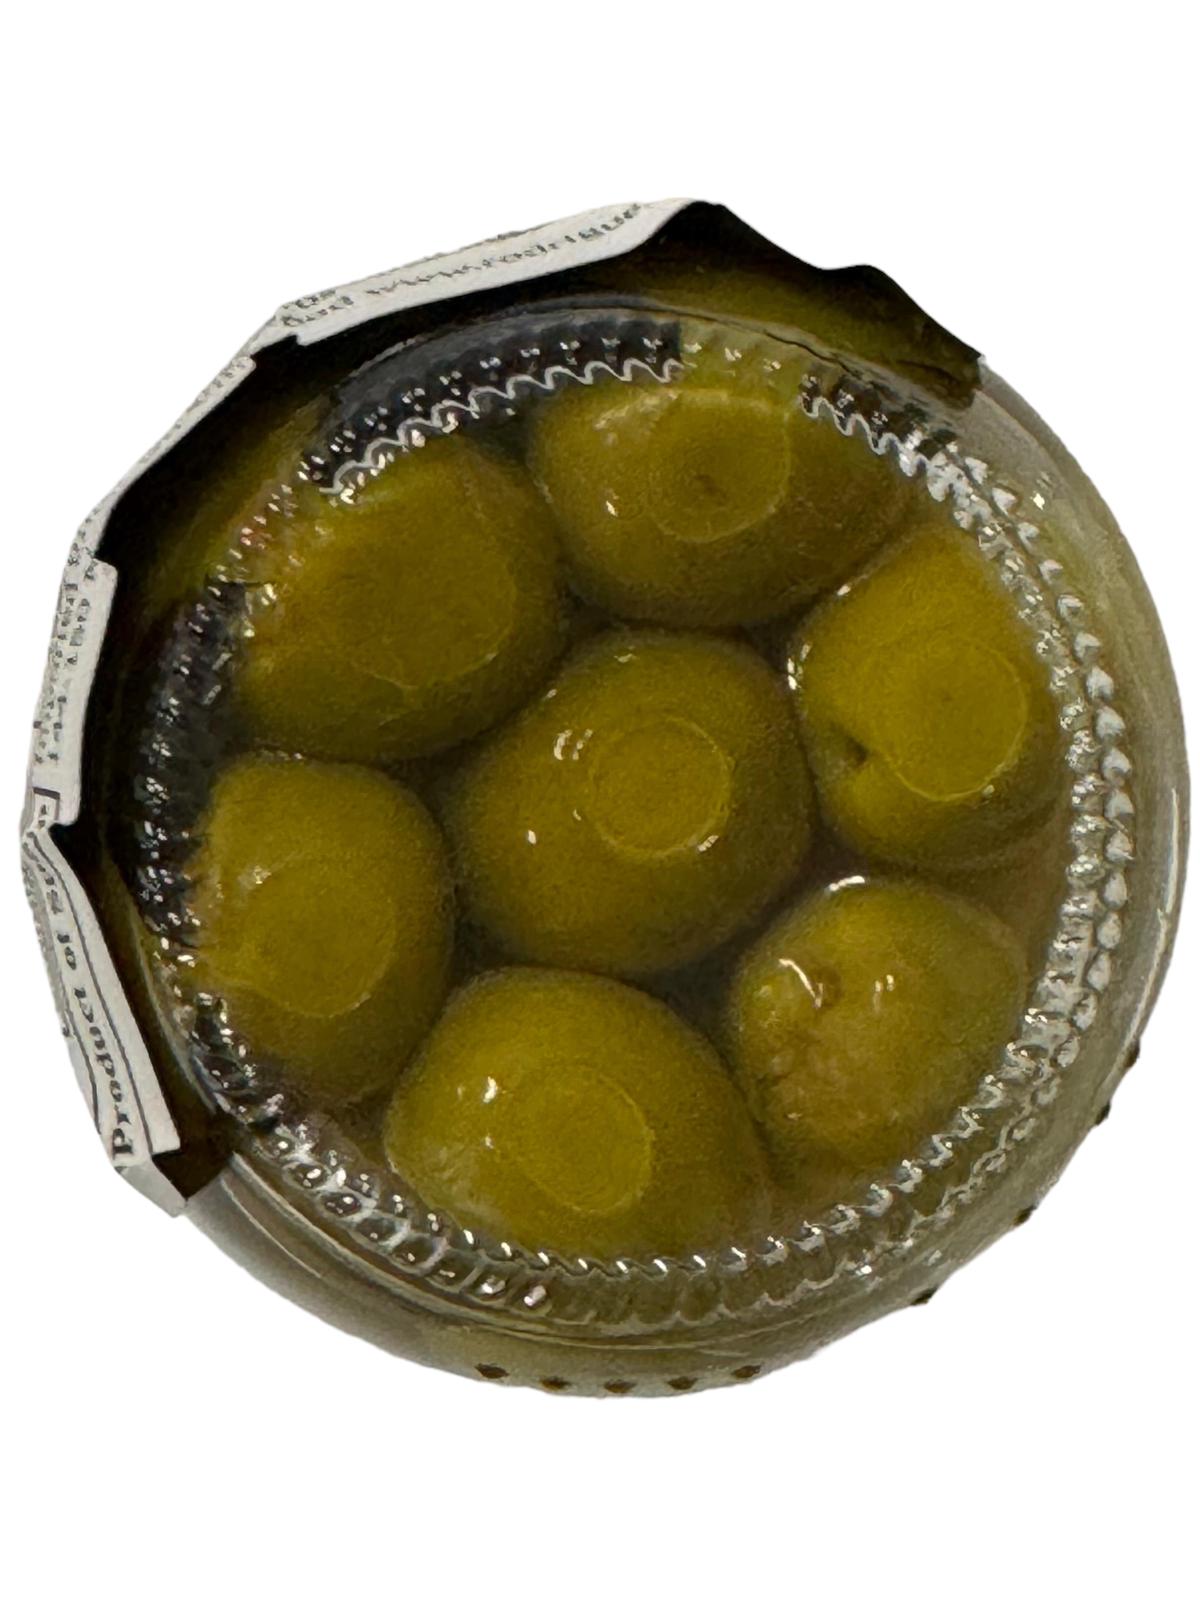 Bernal Especialidades Aceitunas Bomba Whole Green Spicy Olives 300g Best Before Nov 2025